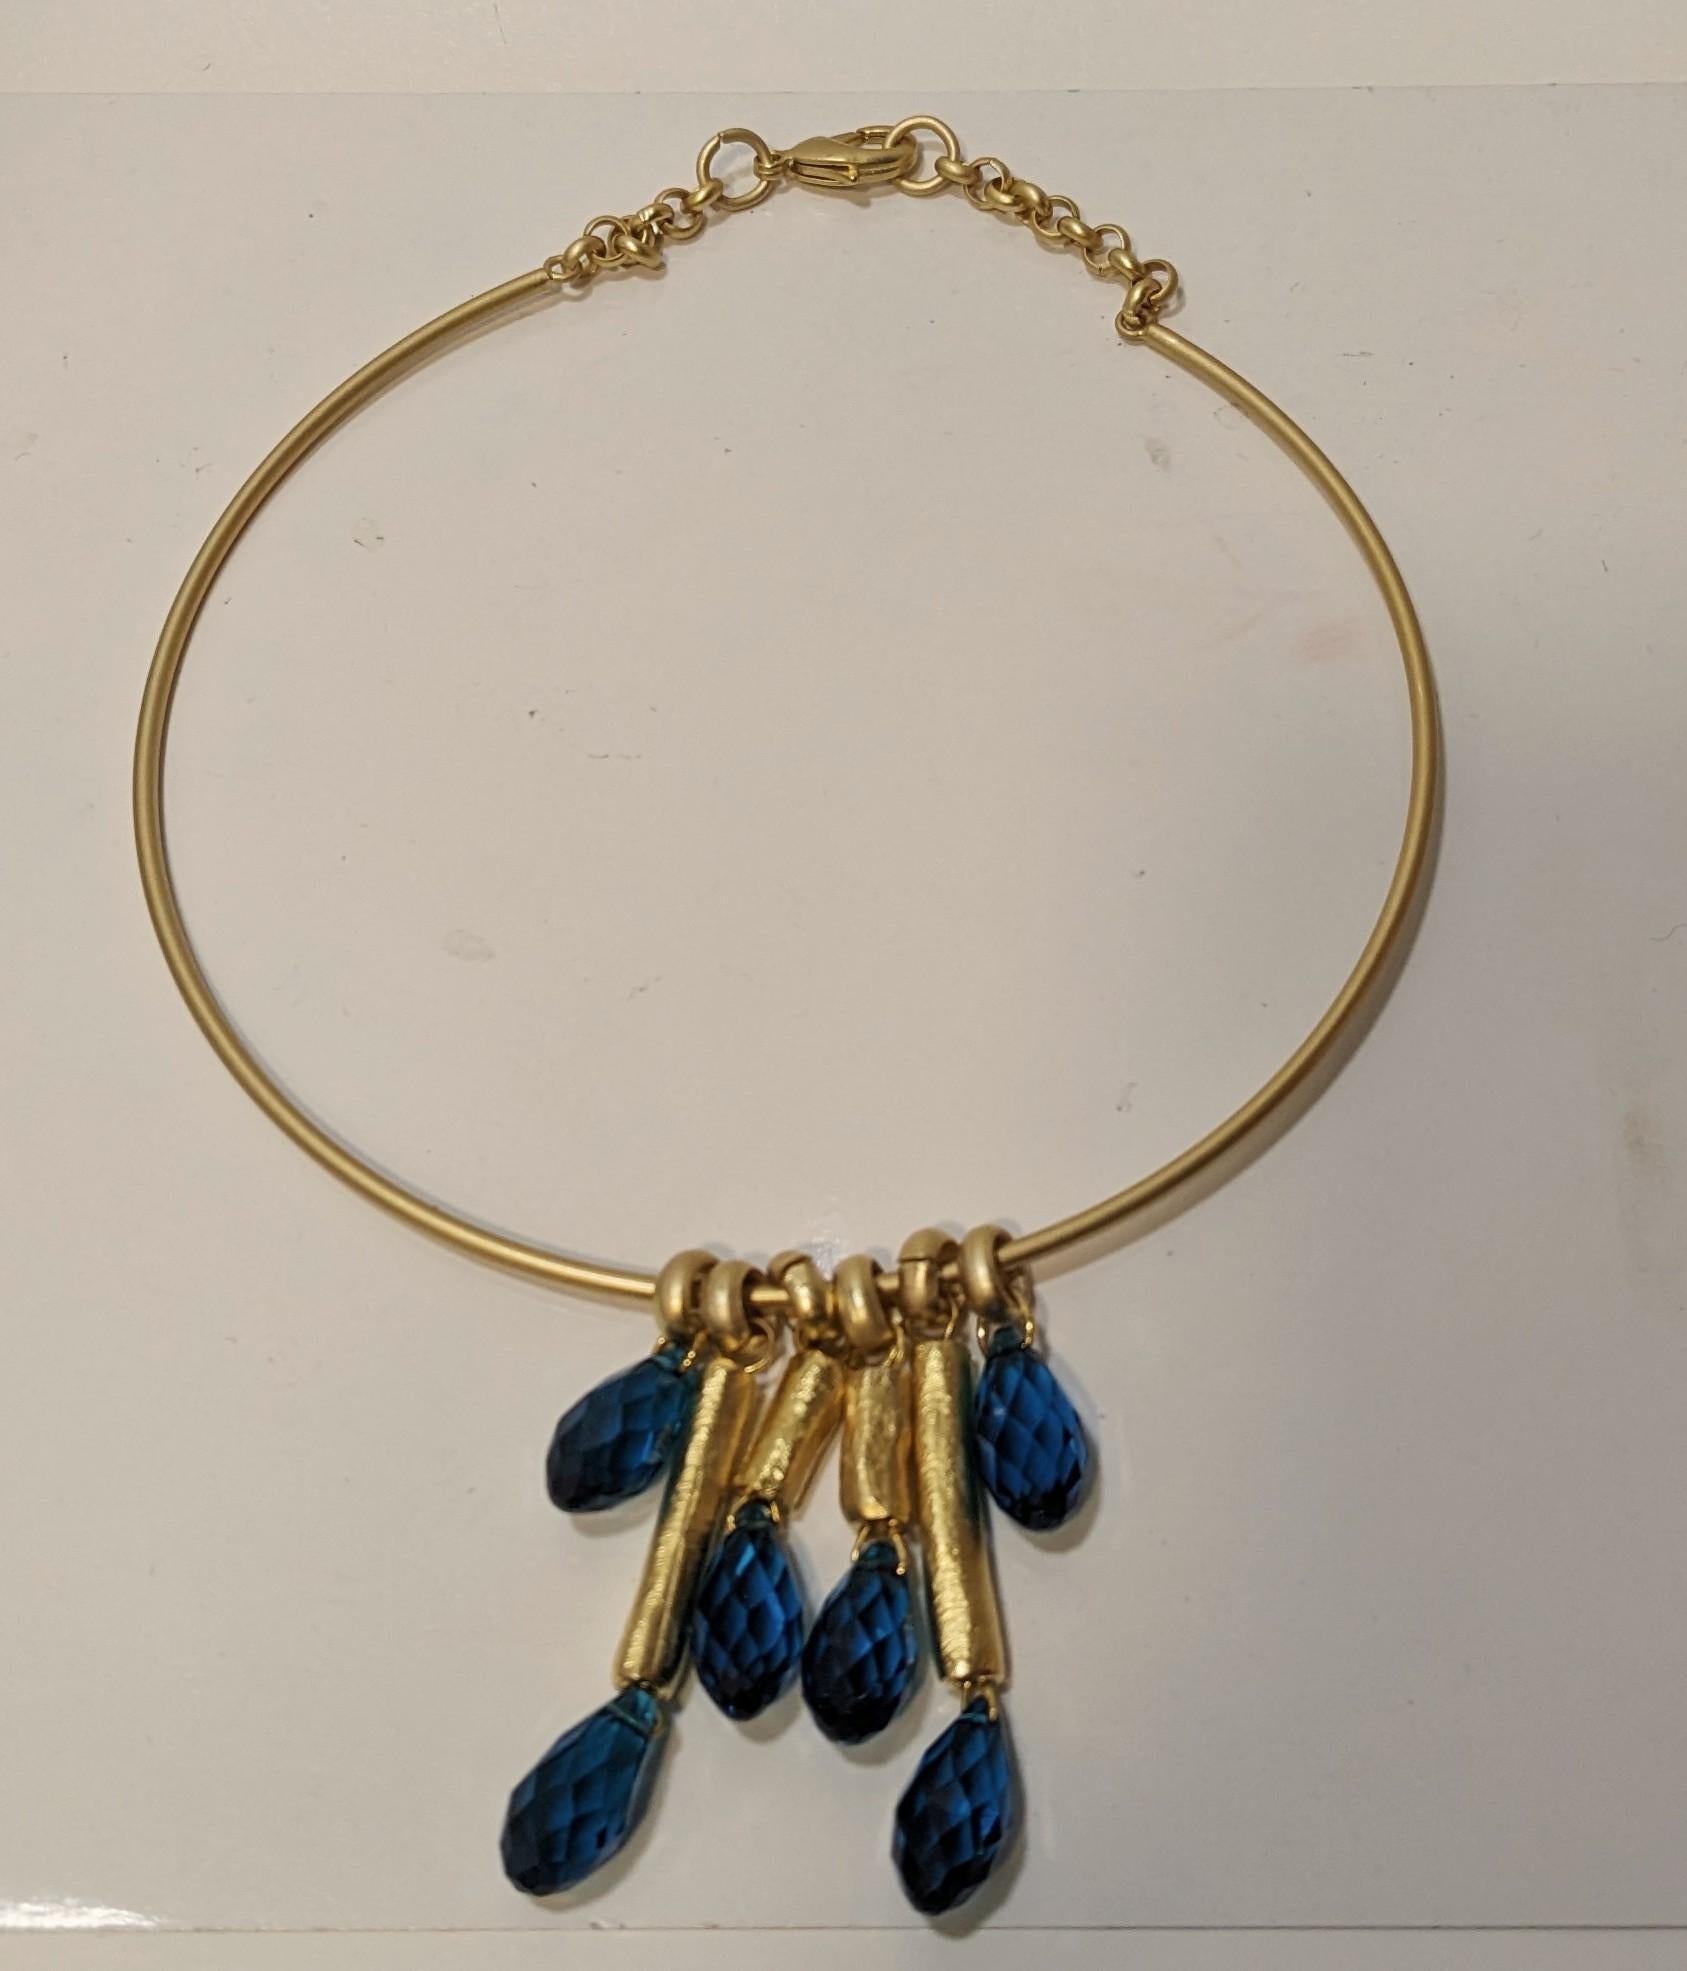 Rigid Choker with Tubes and  Capri Blue Crystals
All in 18 Karat Matte Gold Plating. It has a Carabiner Closure.
The crystals can also be emerald green.
Neck measurement  42cm (16,53 inches)


Pradera Fashion Division  is specialized in European